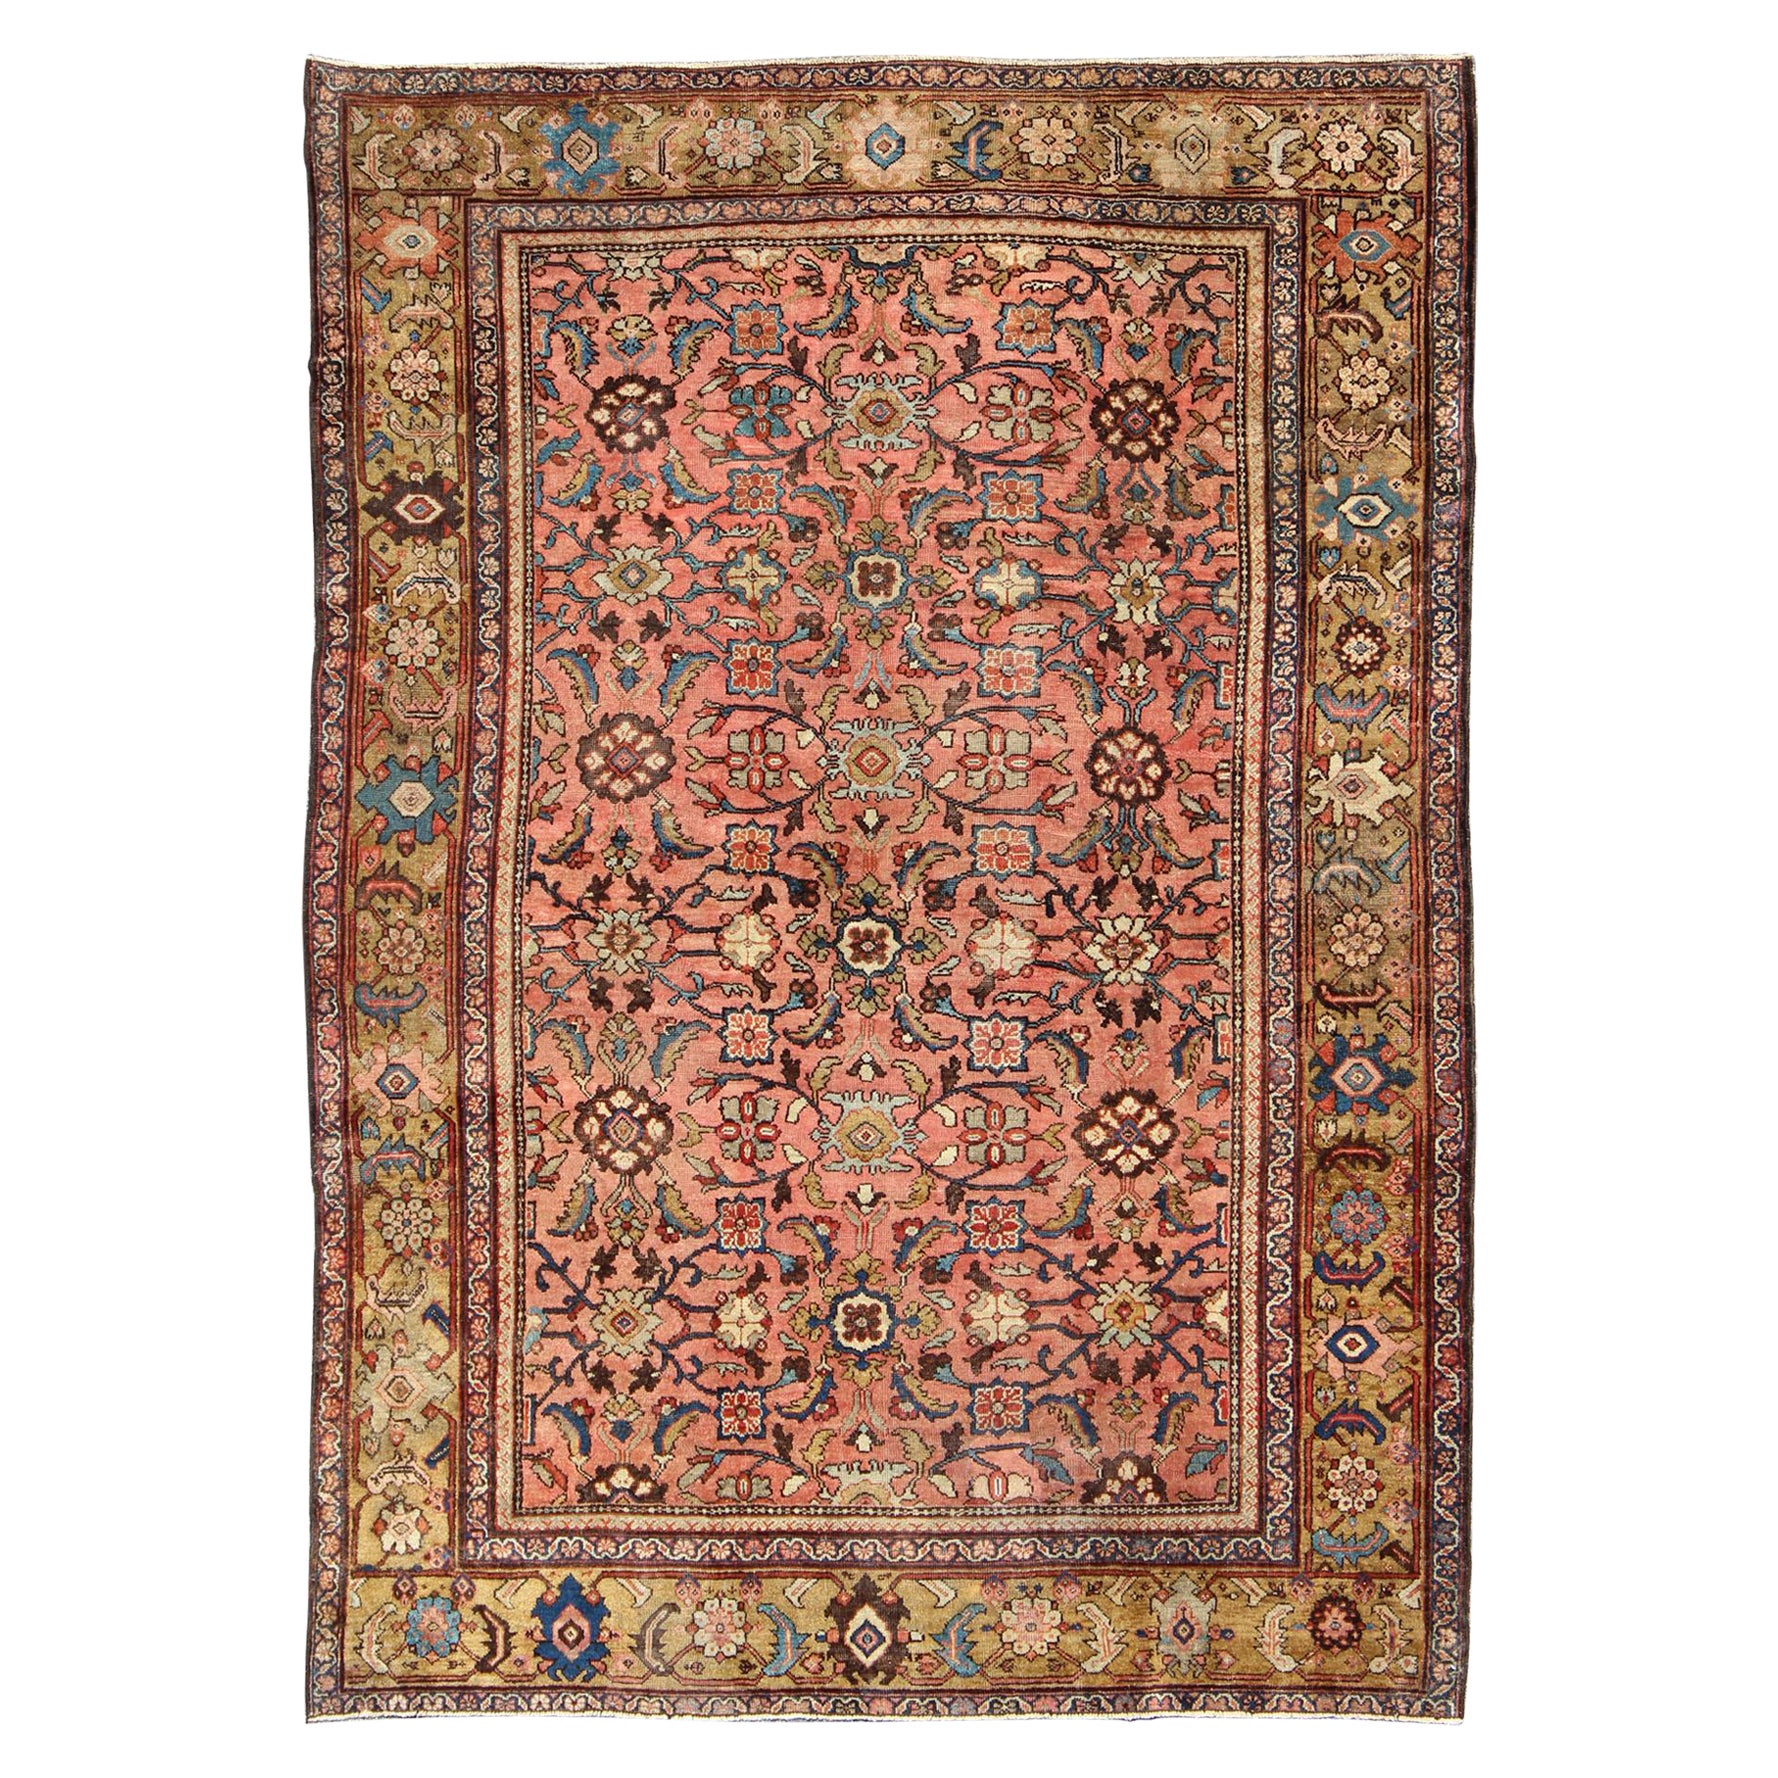   Antique Persian Sultanabad Colorful Rug With All-Over Design in salmon & Gold For Sale